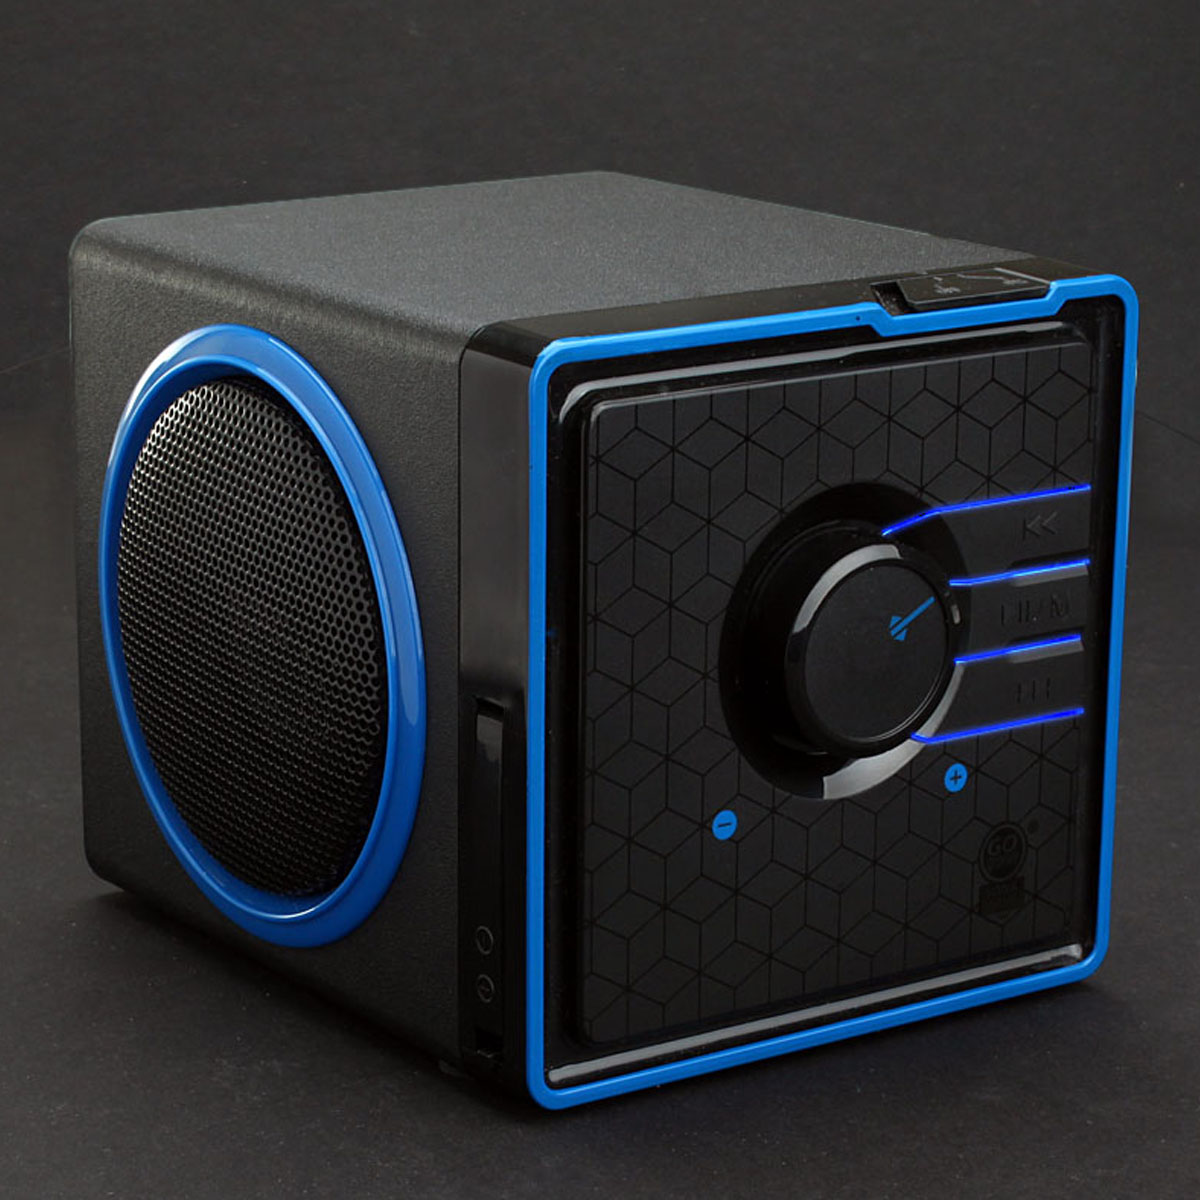 GOgroove Portable Stereo Speaker System w/ Rechargeable Battery & 3.5mm Aux Port - image 4 of 9